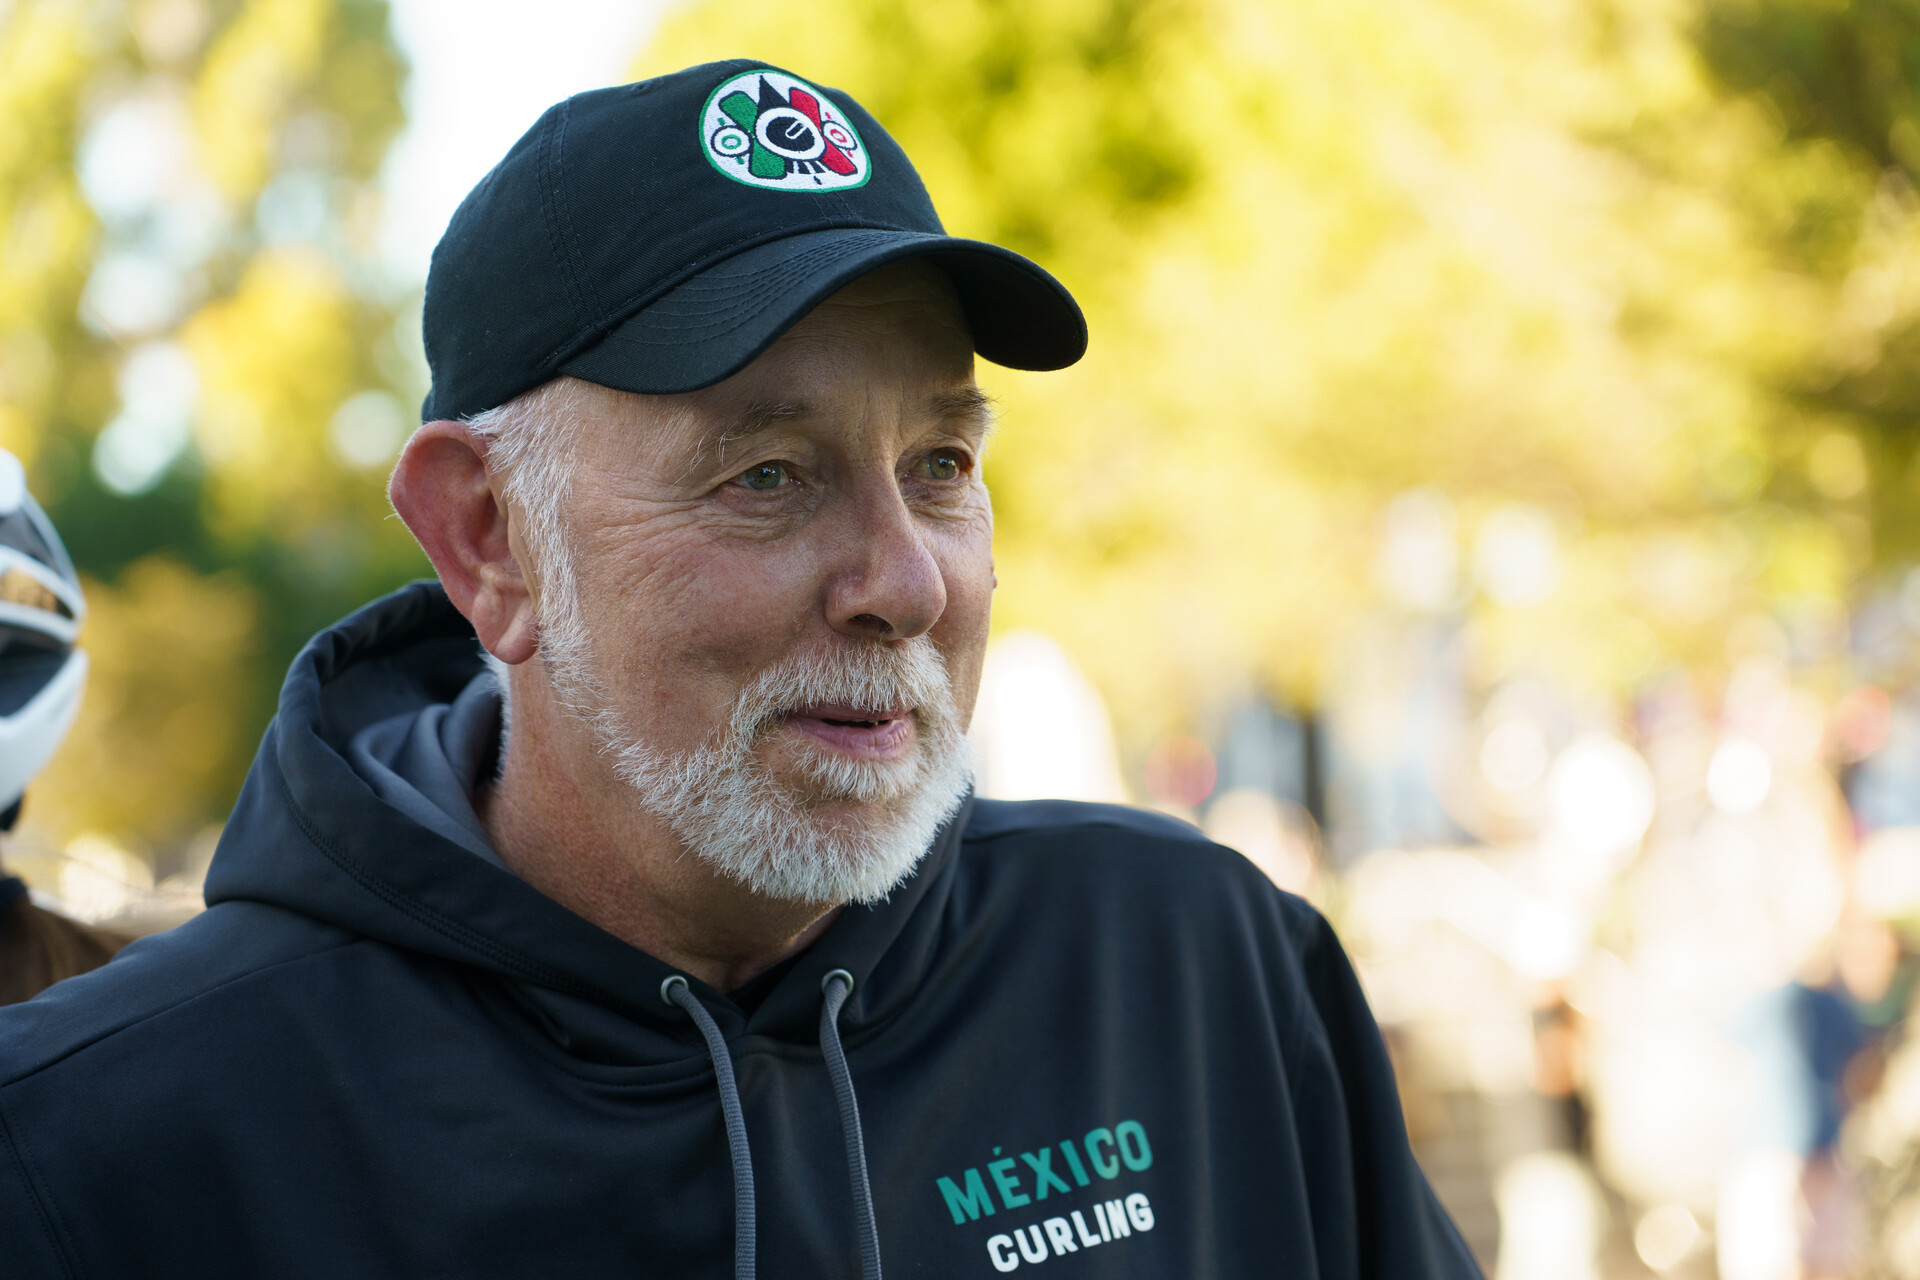 A man in his 60s with a trimmed white beard wearing a black cap and a black hoodie smiles as he looks away from the camera.